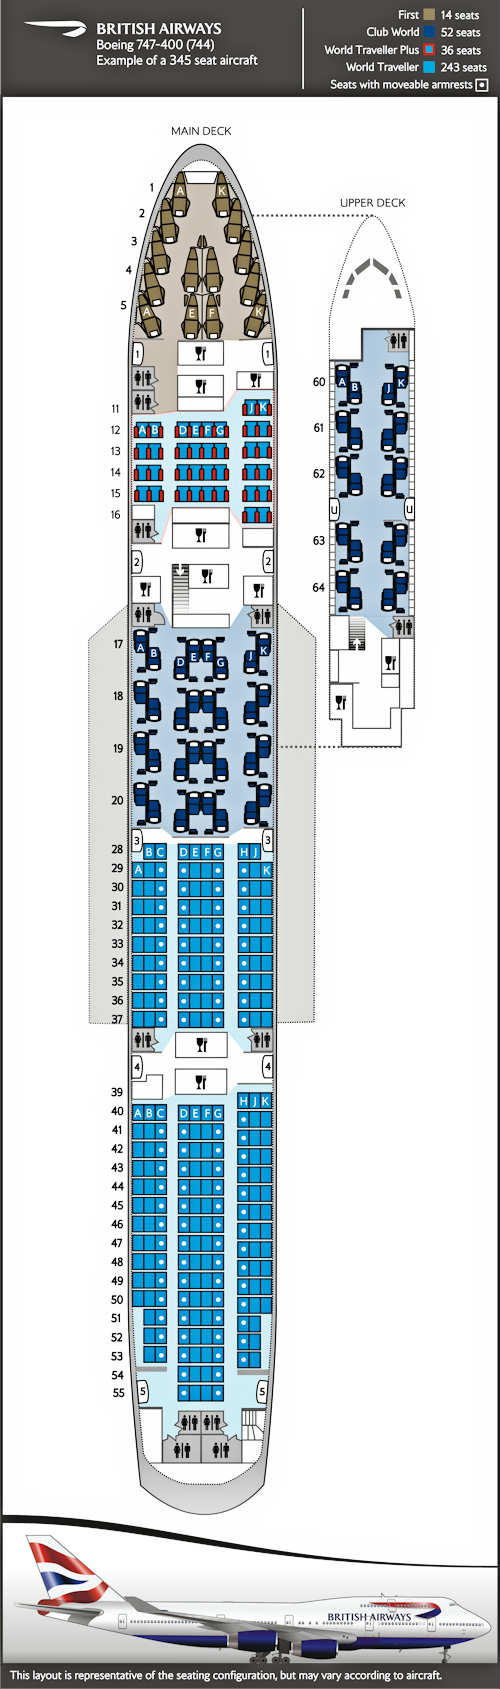 Seatmap for Boeing 747-400, 4 class 345 seat layout.